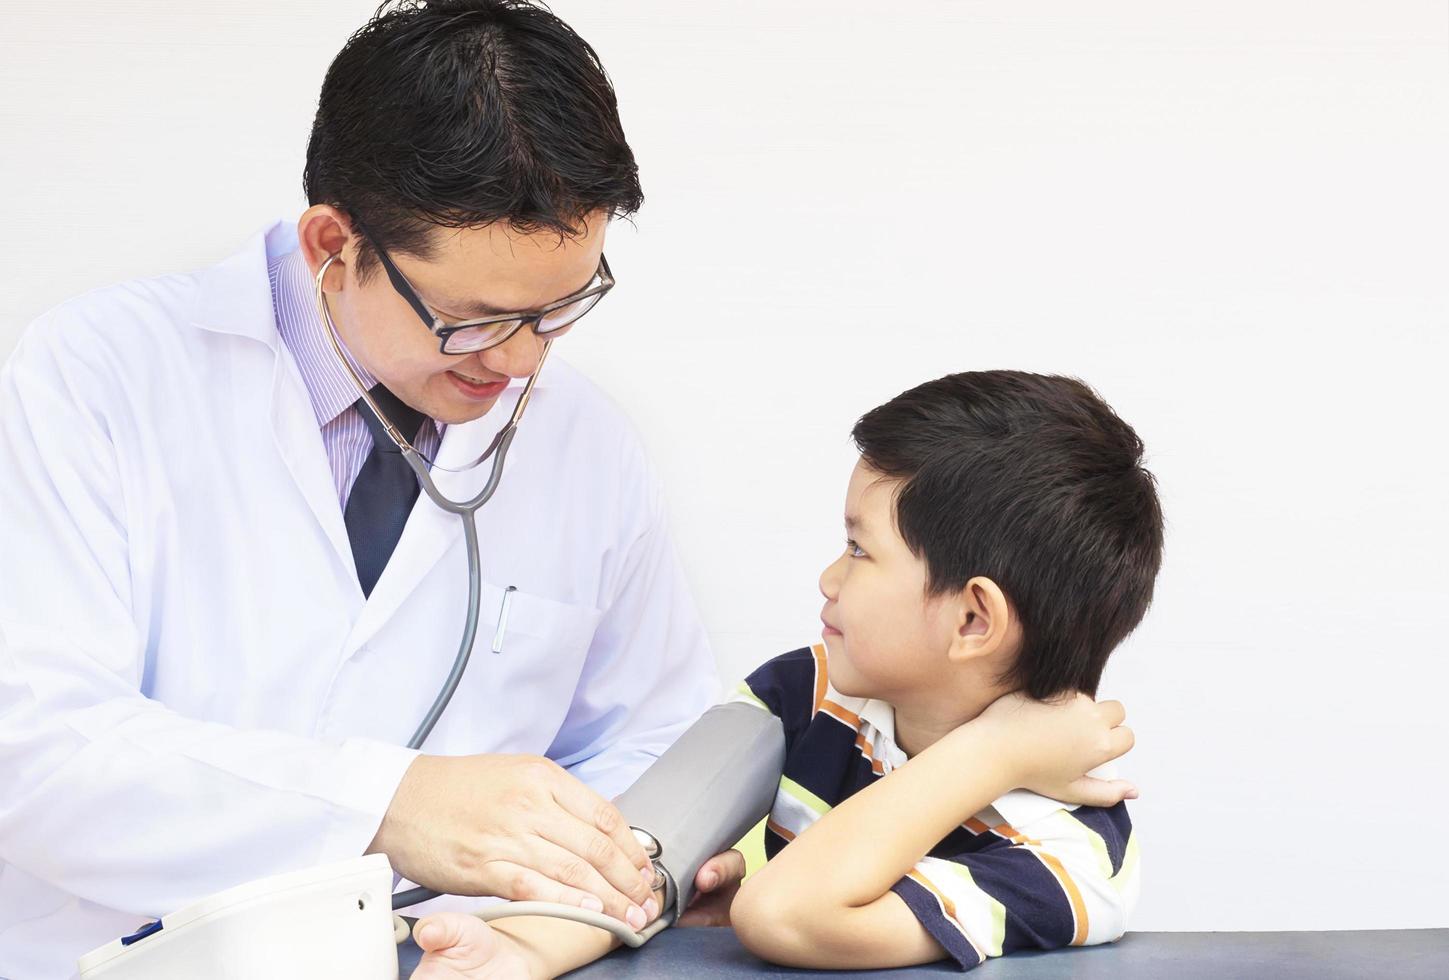 Asian boy being examined by male doctor using stethoscope and blood pressure monitor over white background photo